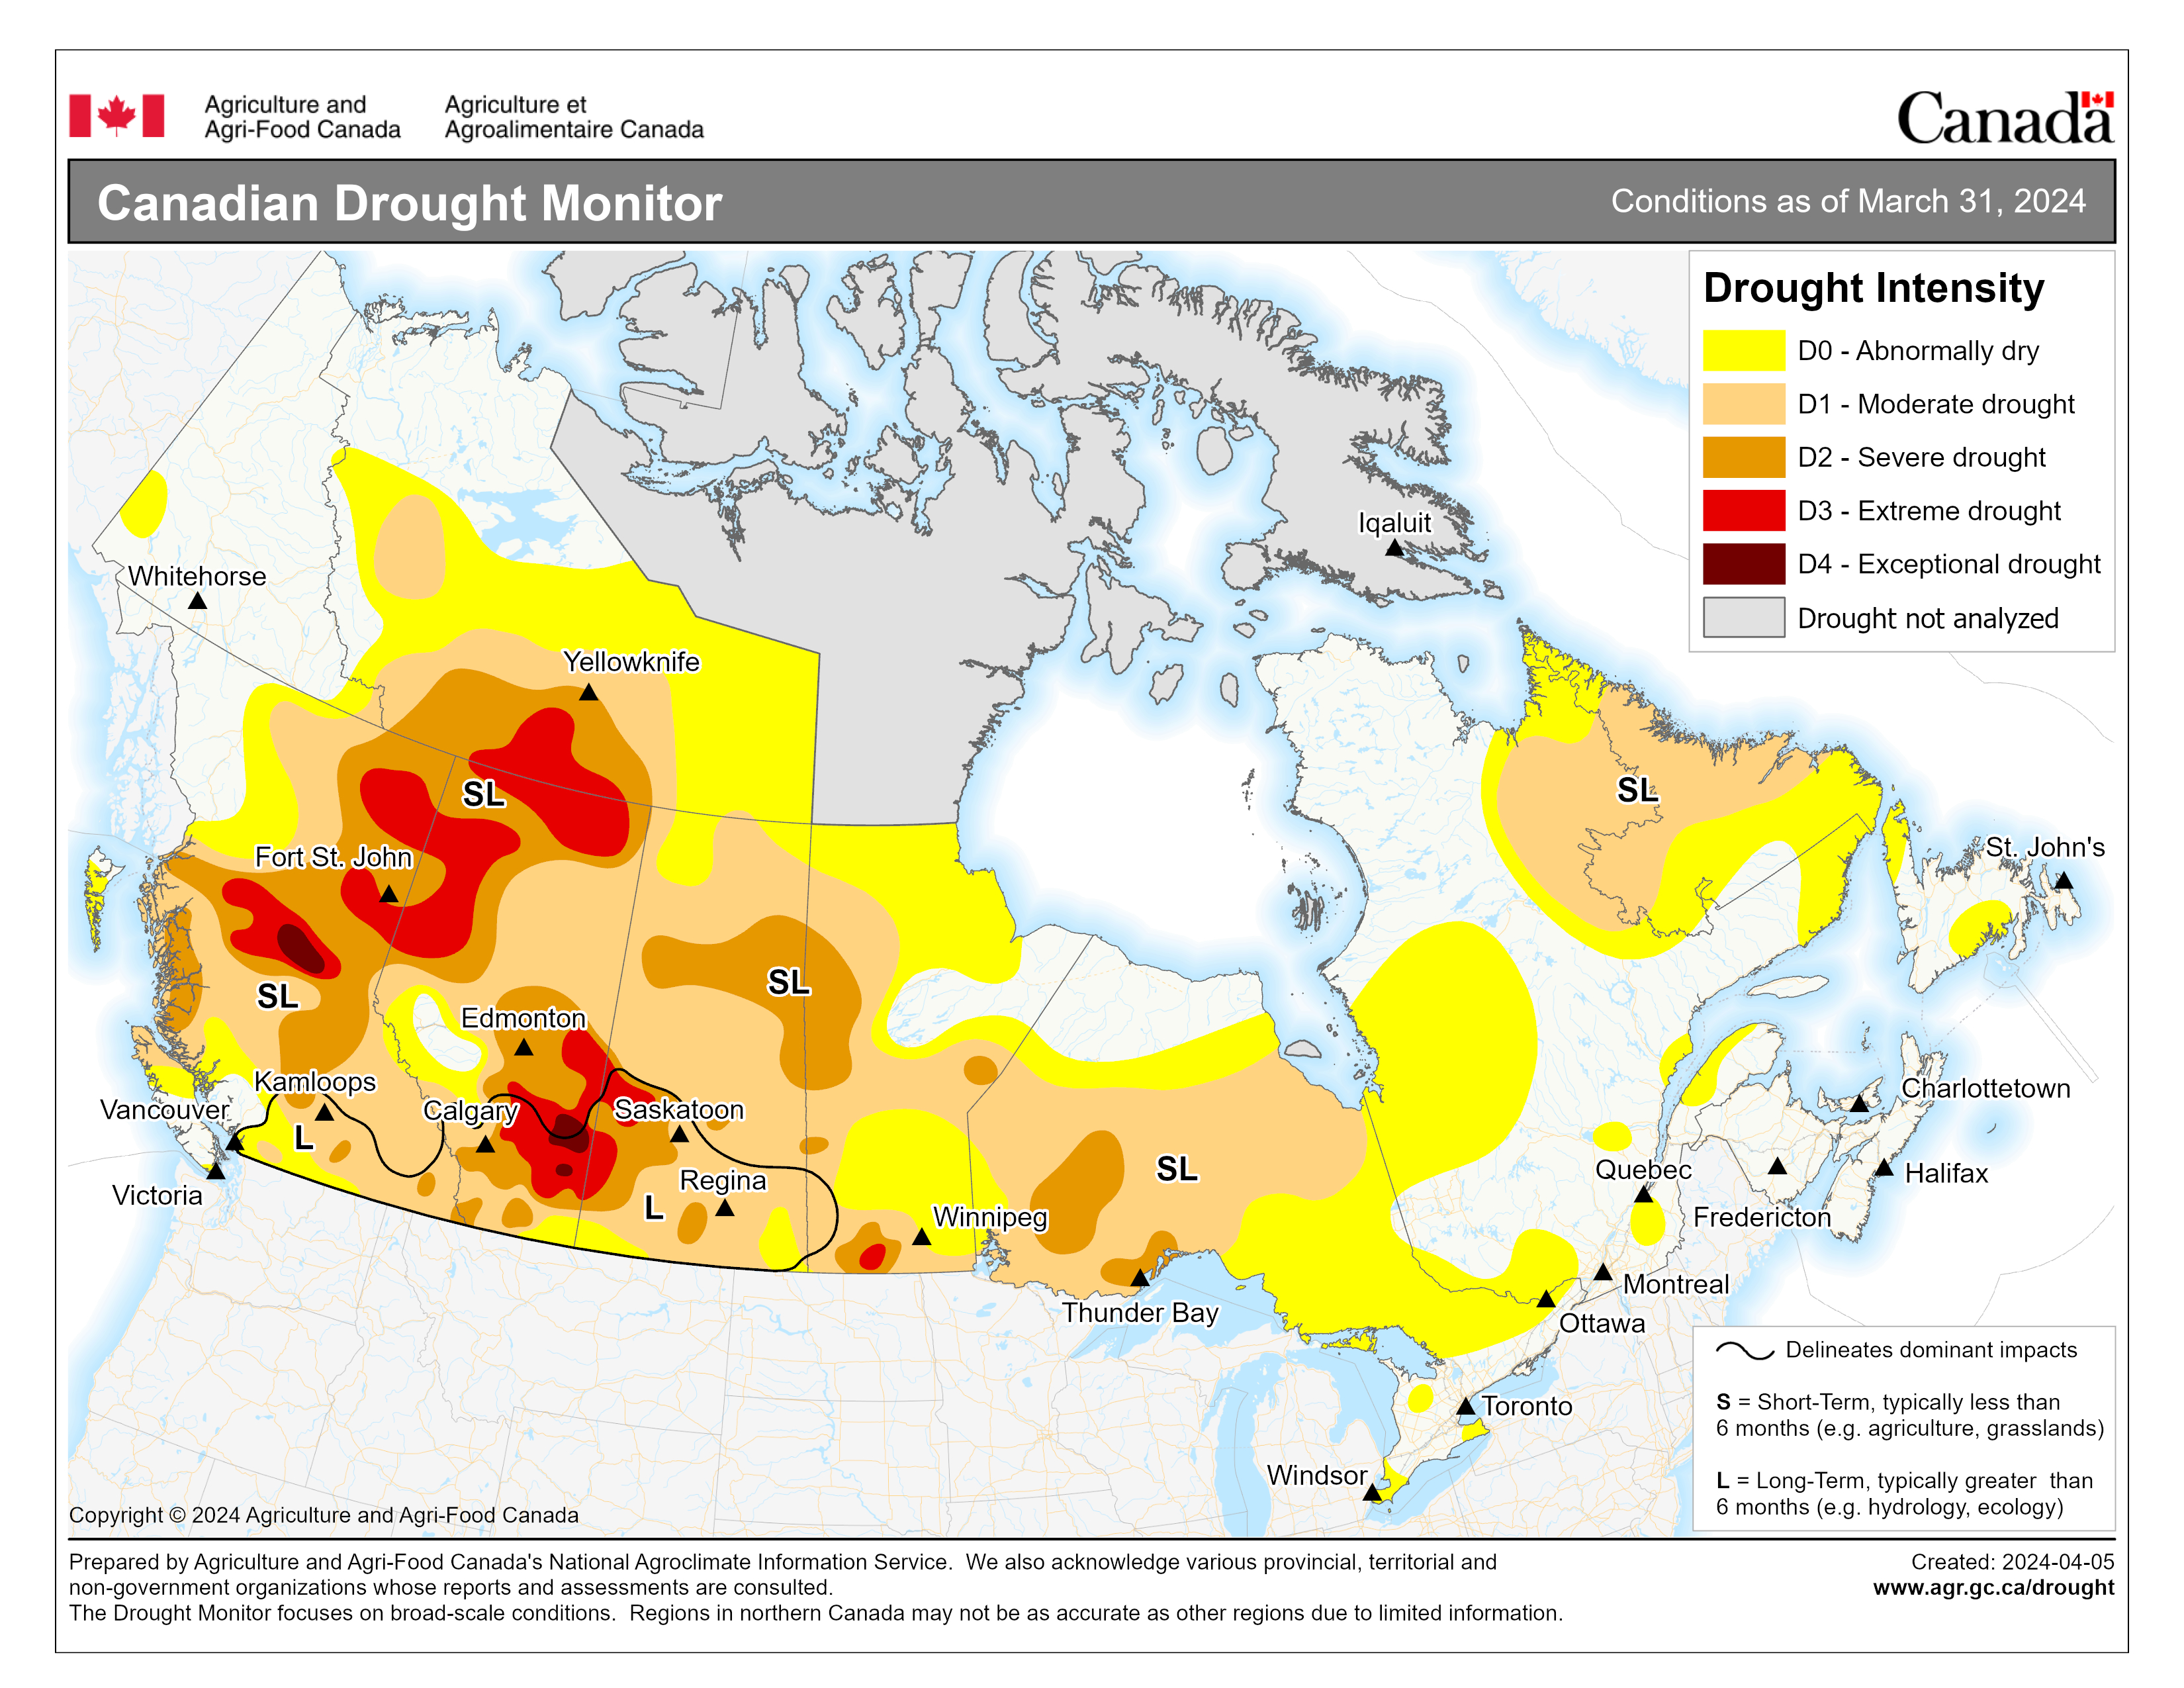 Map showing the Canadian Drought Monitor for conditions as of March 31, 2024